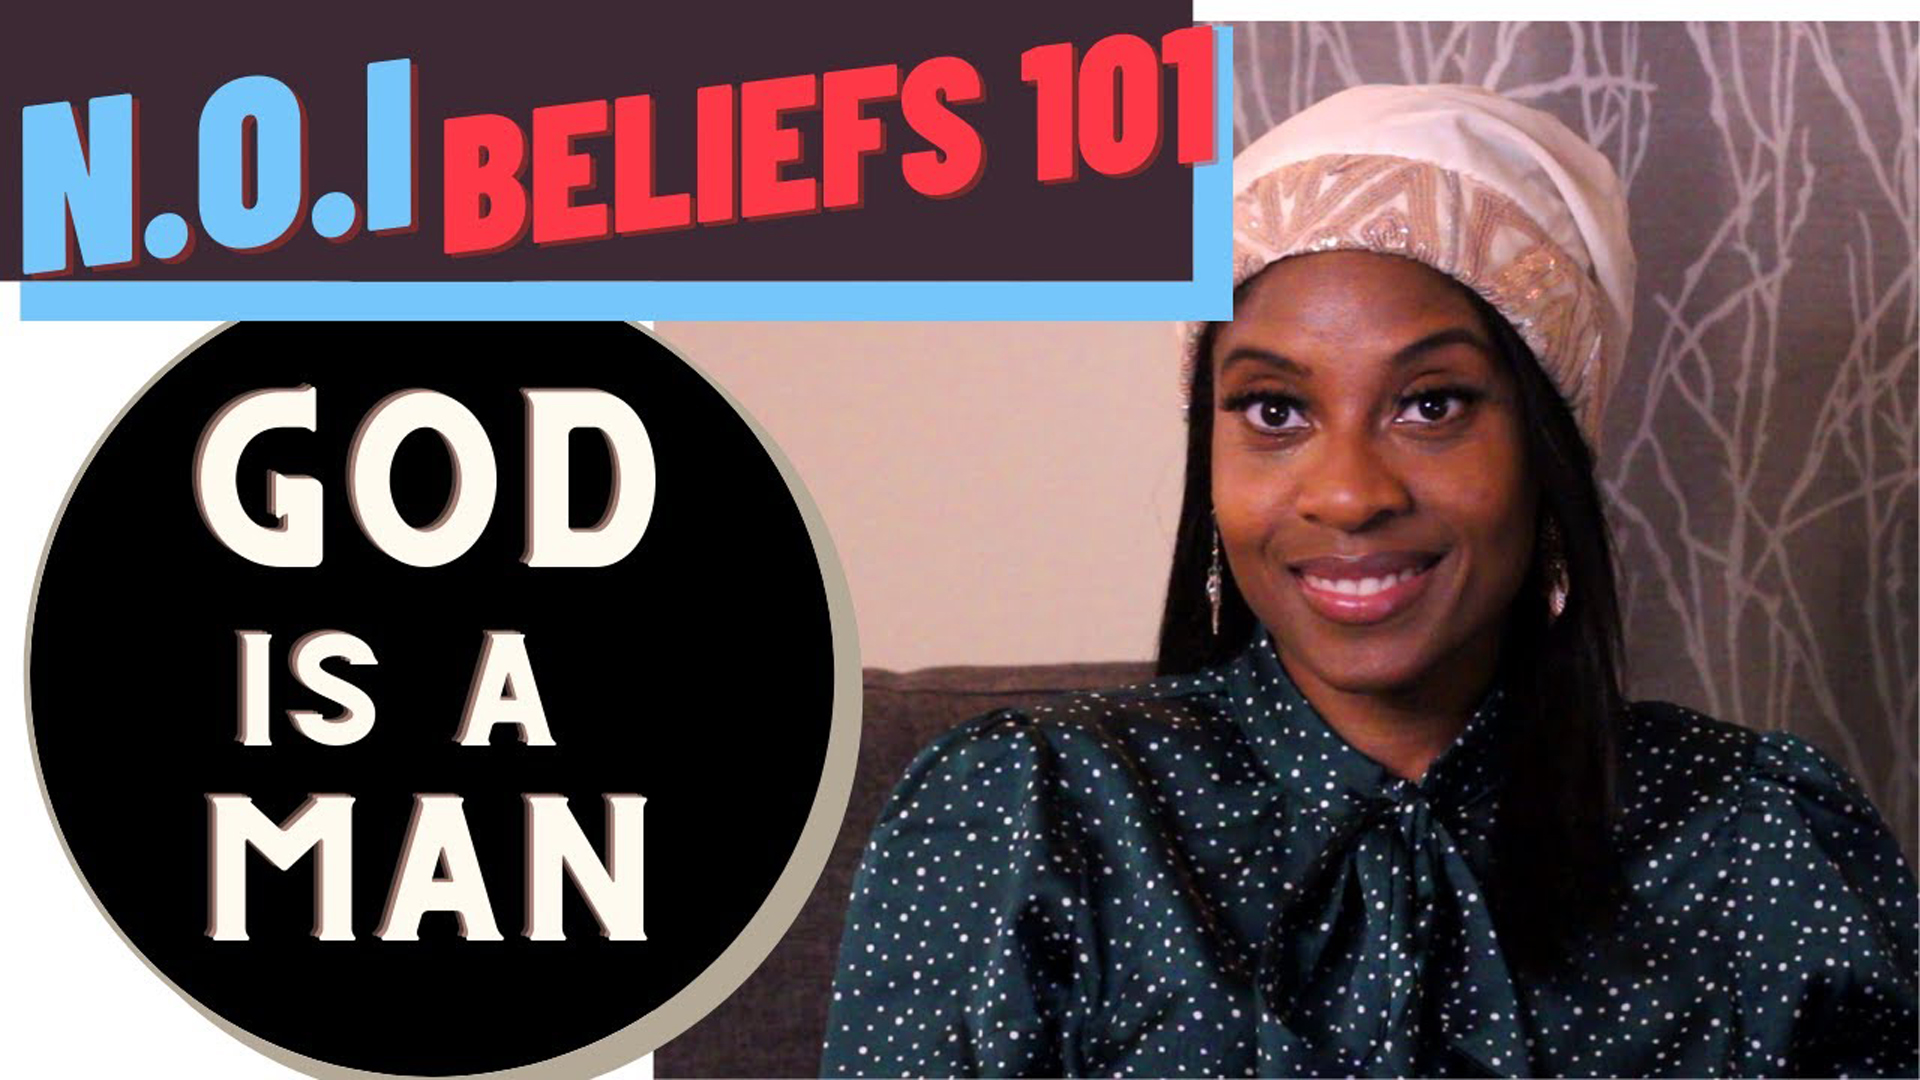 Nation Of Islam Beliefs 101: God Is A Physical Man, Not Just Spirit